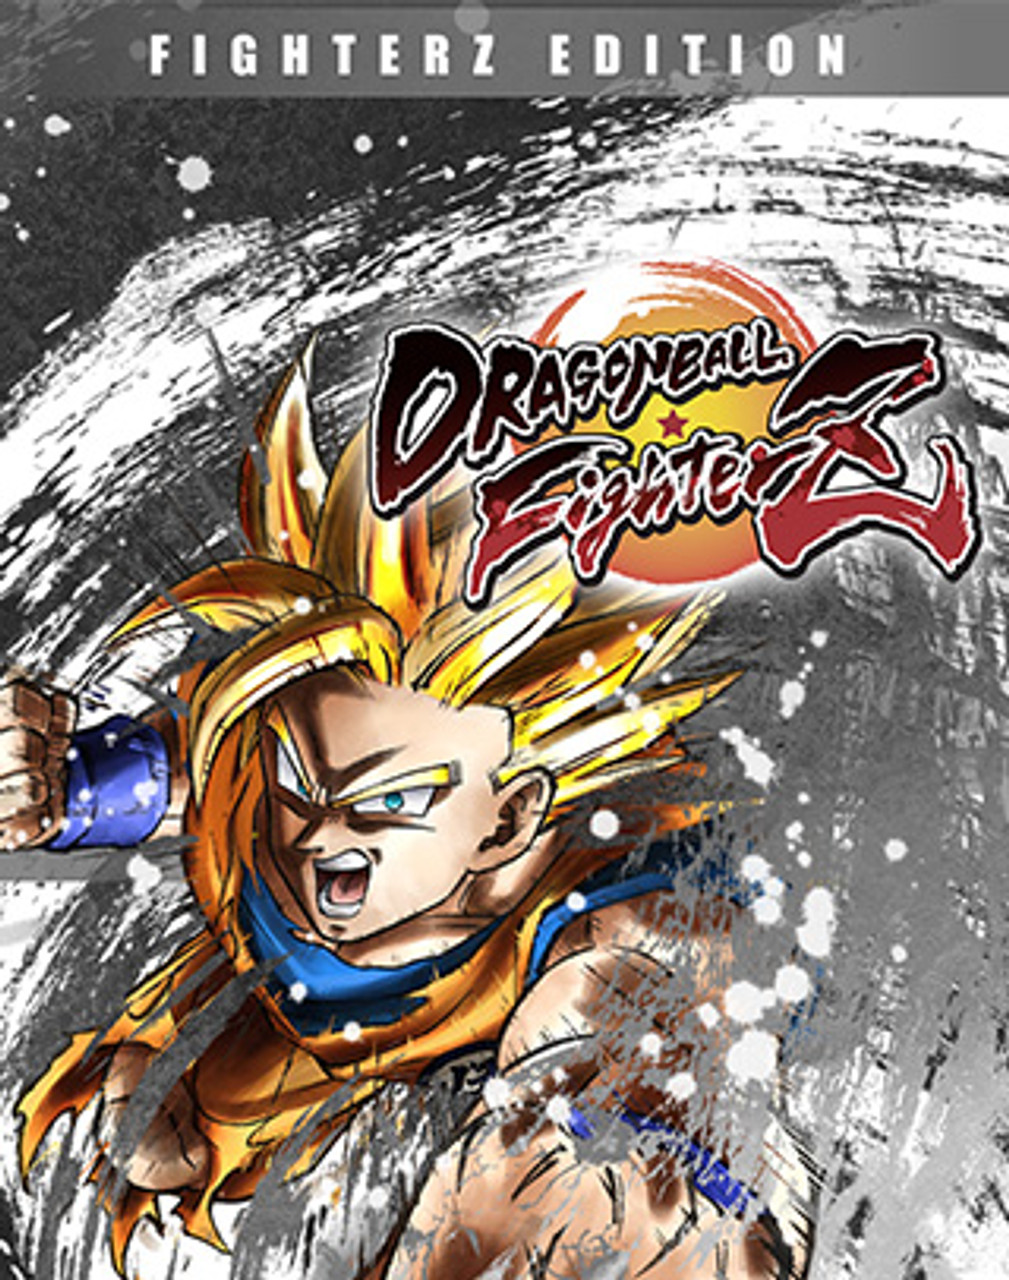 Dragon Ball FighterZ Day One Edition, PS4 